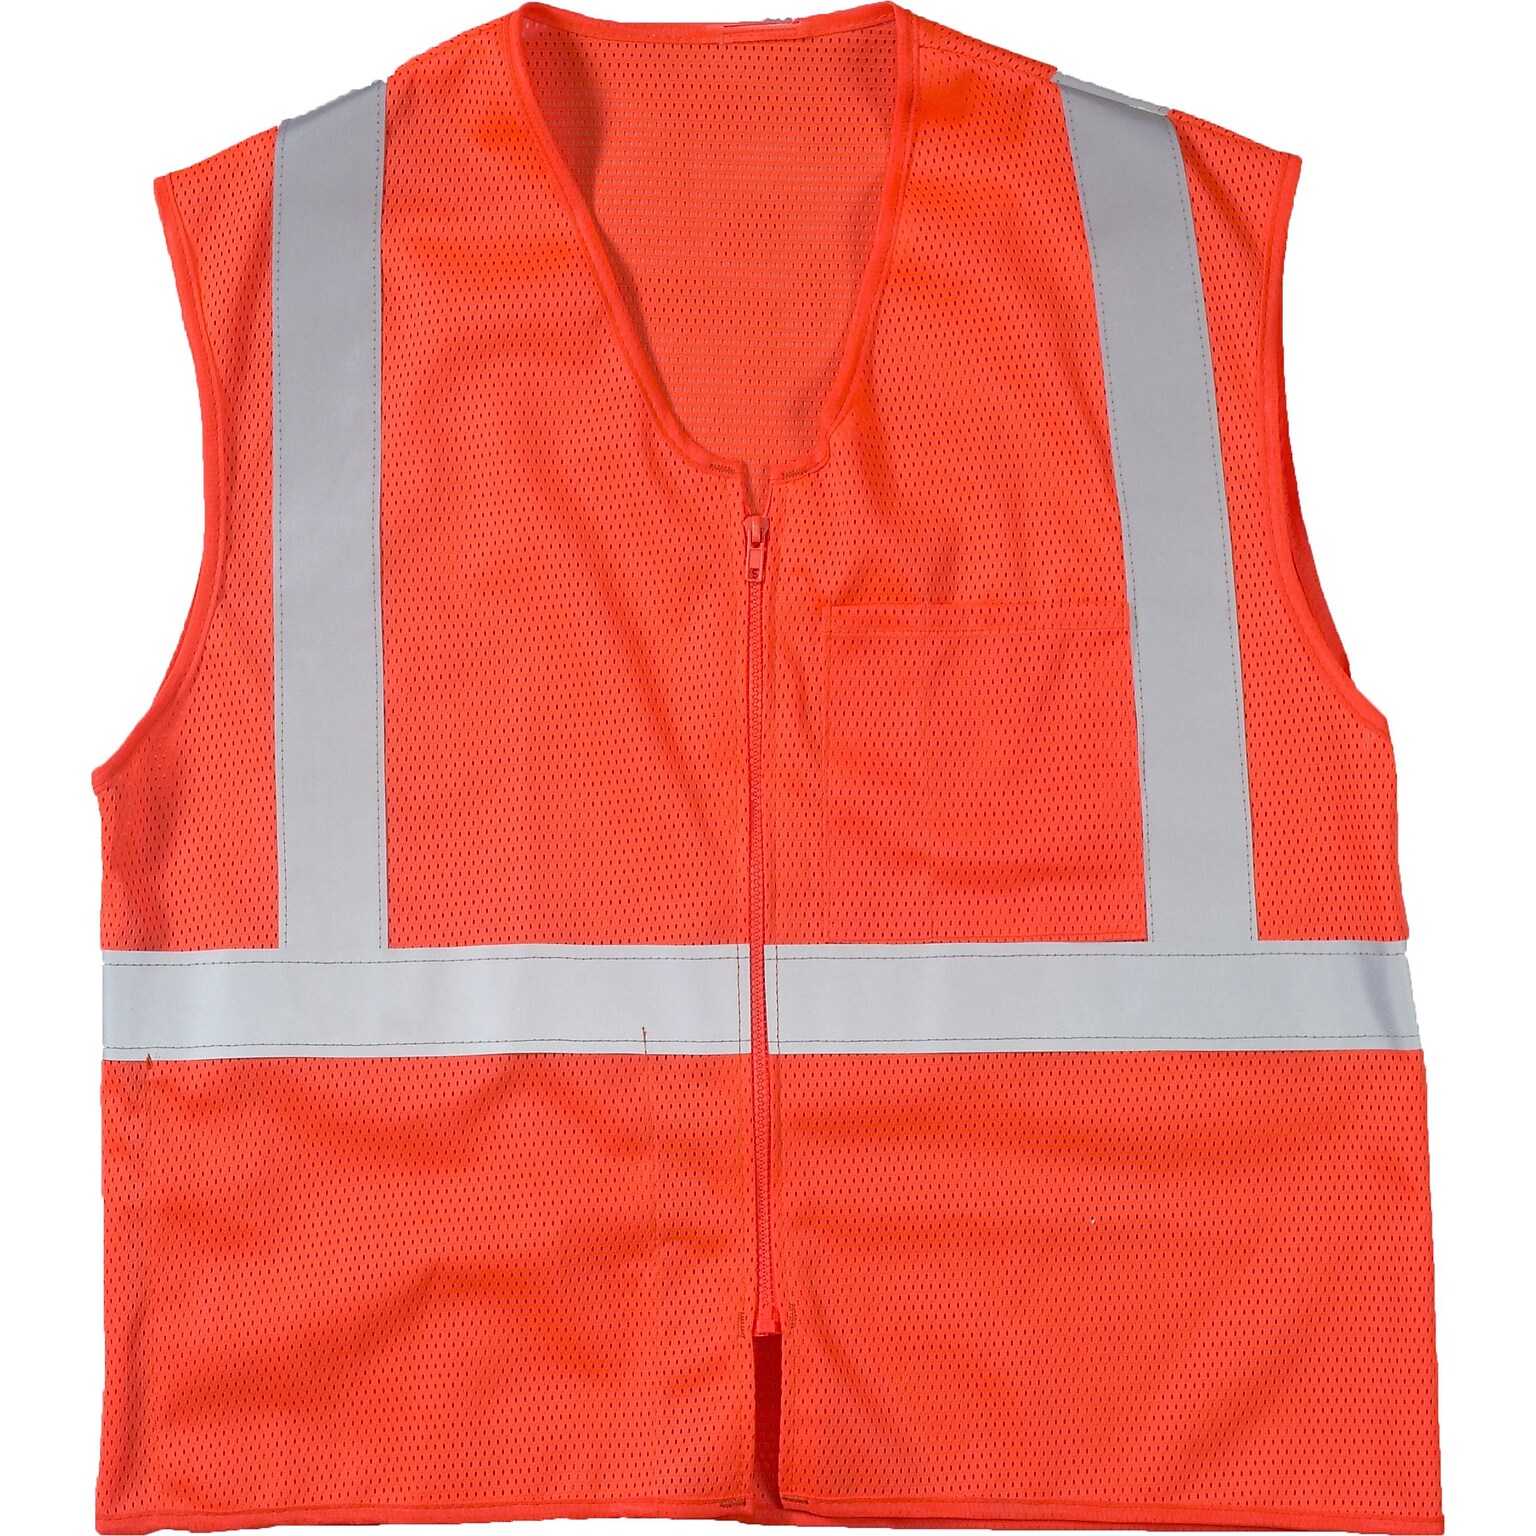 Mutual Industries High Visibility Sleeveless Safety Vest, ANSI Class R2, Orange, 4XL/5XL (17005-45-7)